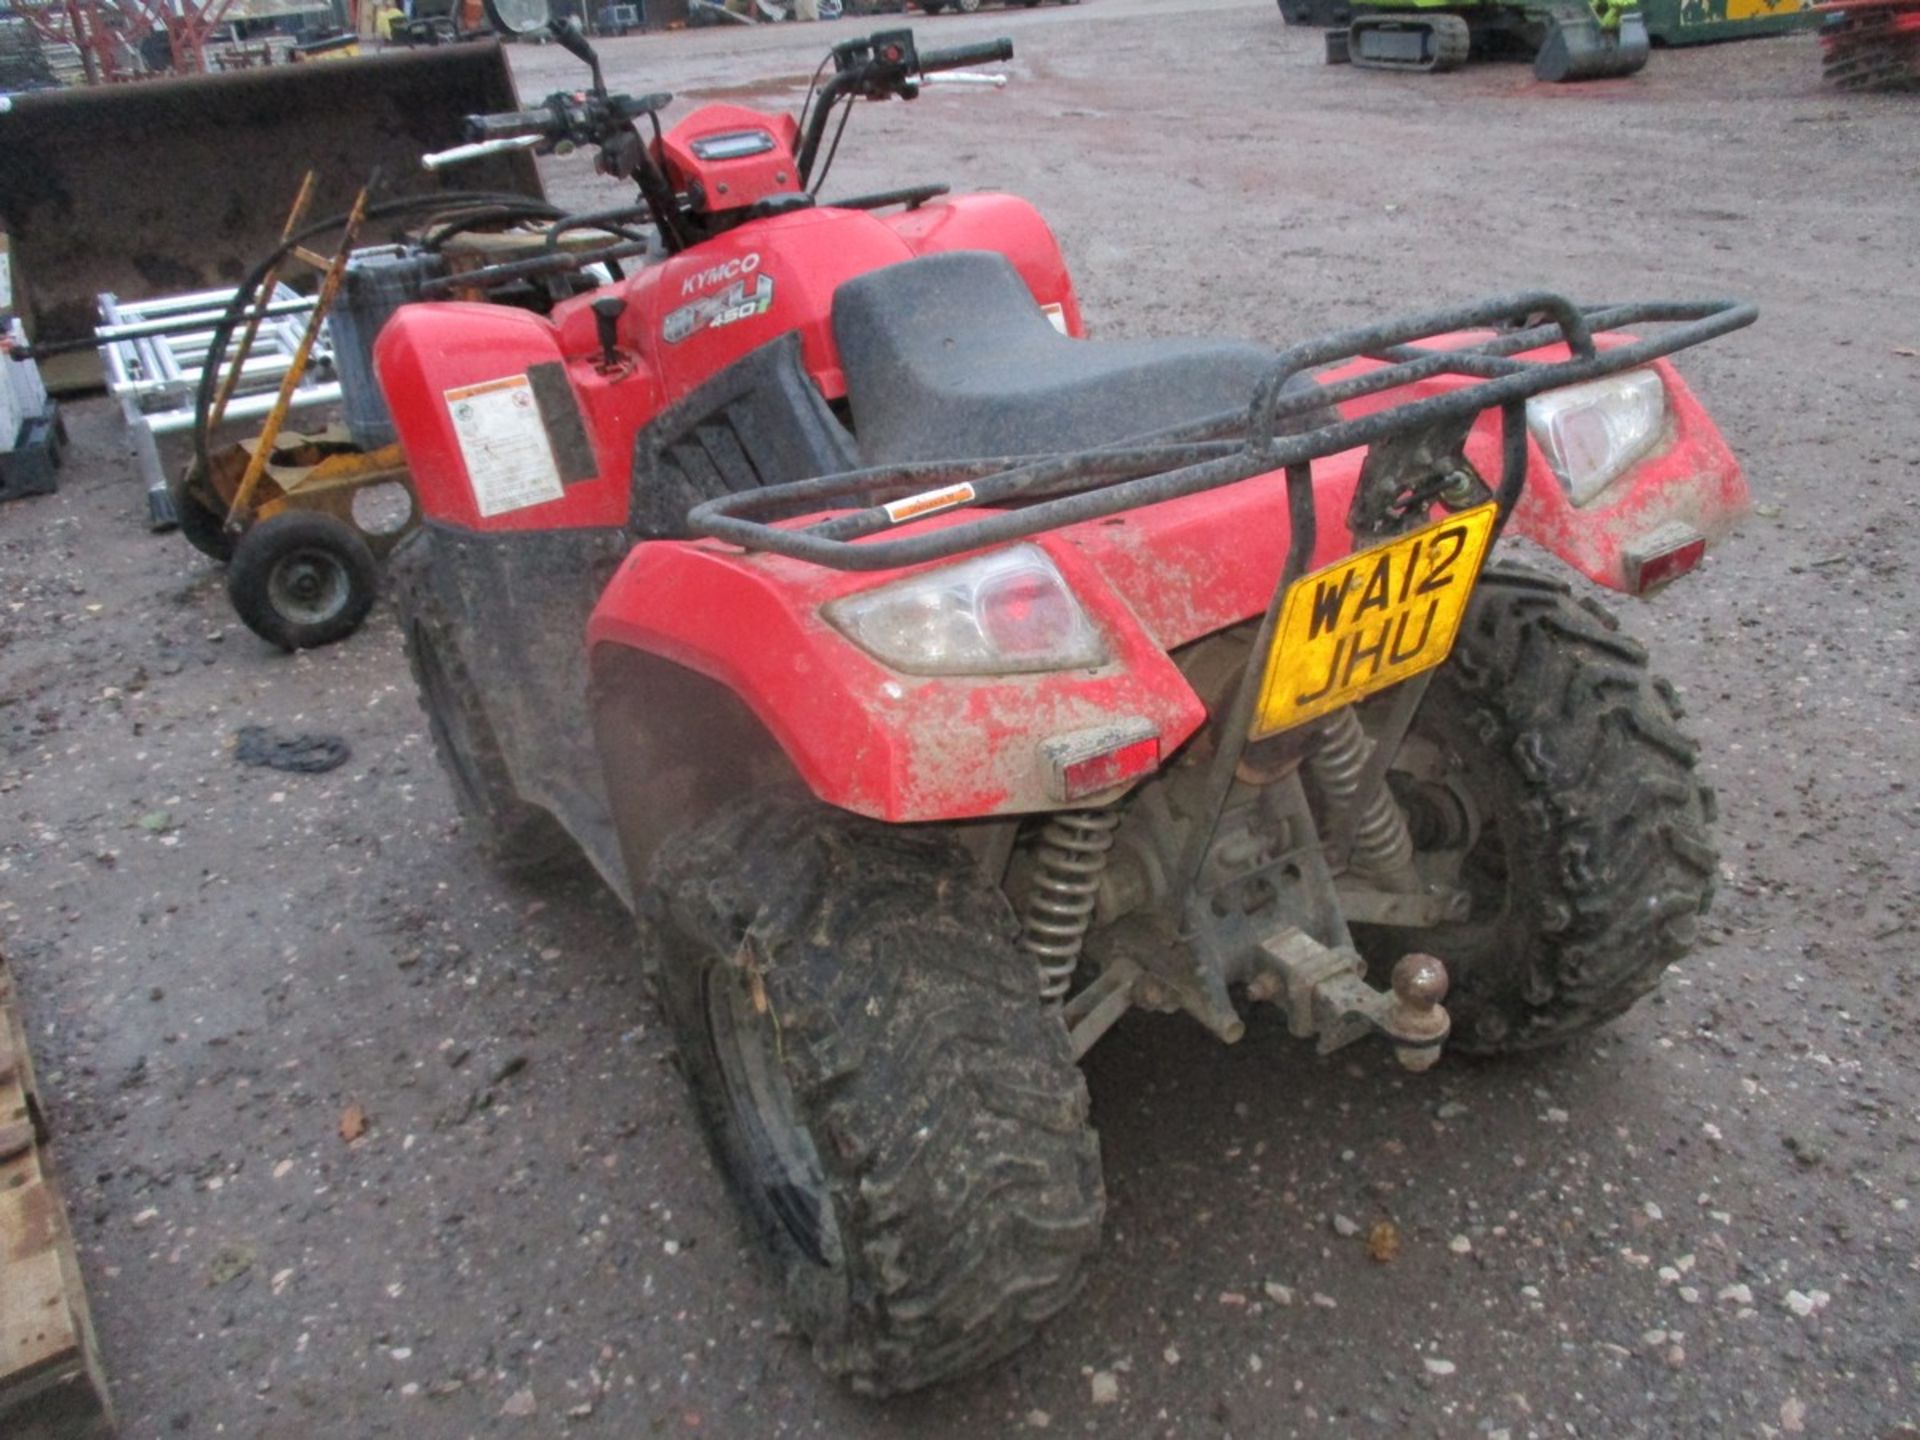 KYMCO 450 QUAD WA12 JHU (FROM A DECEASED ESTATE, NOT STARTING BEEN STOOD A WHILE) - Image 4 of 4